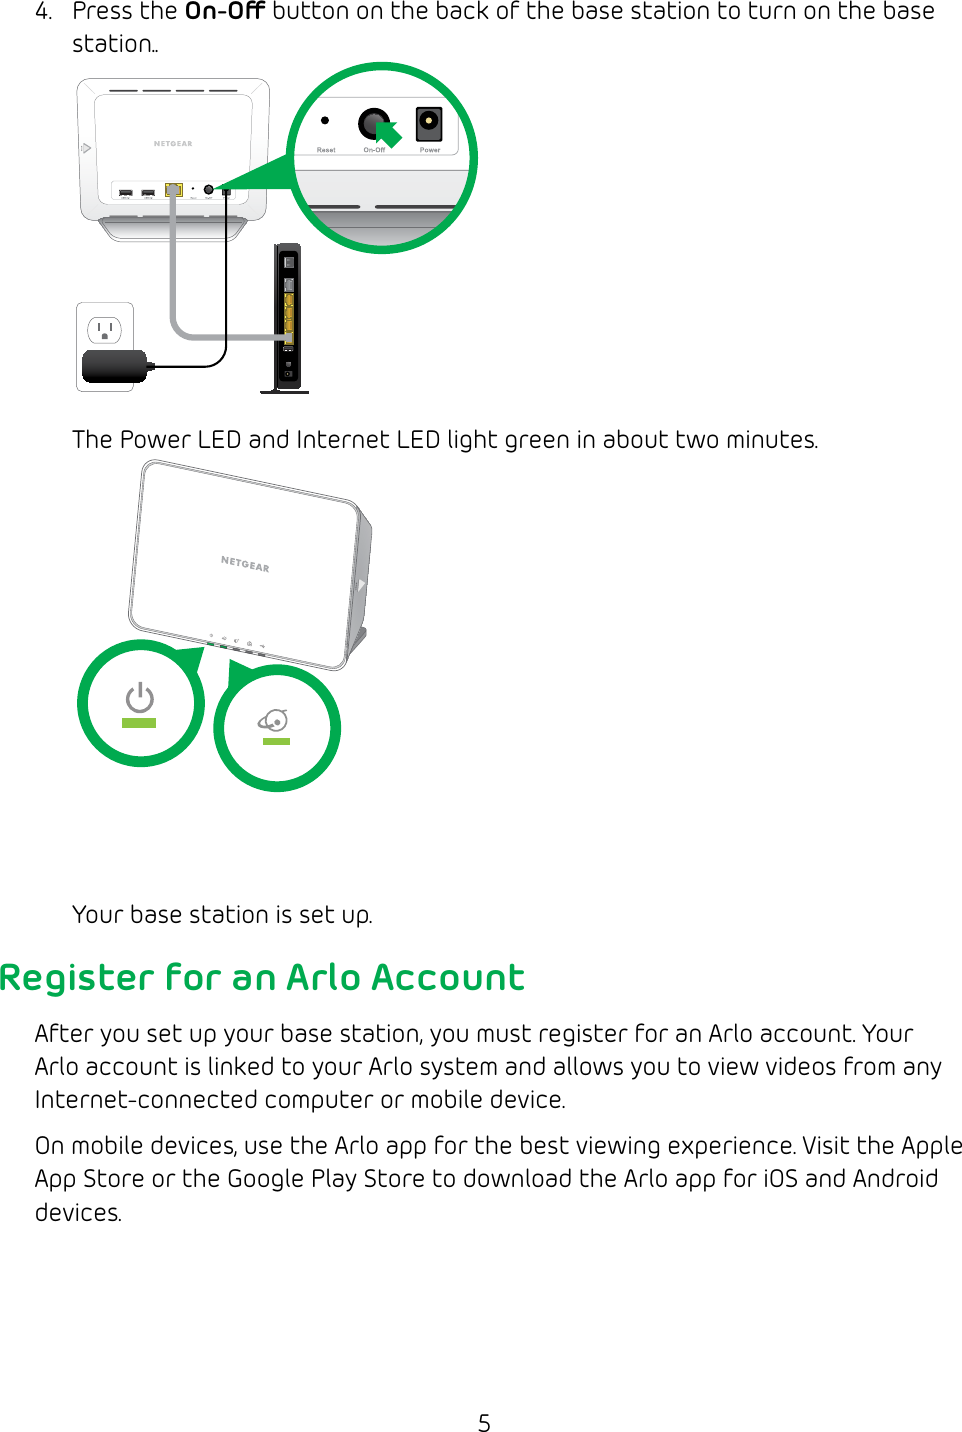 54.  Press the On-O button on the back of the base station to turn on the base station..The Power LED and Internet LED light green in about two minutes. Your base station is set up.Register for an Arlo AccountAfter you set up your base station, you must register for an Arlo account. Your Arlo account is linked to your Arlo system and allows you to view videos from any Internet‑connected computer or mobile device.On mobile devices, use the Arlo app for the best viewing experience. Visit the Apple App Store or the Google Play Store to download the Arlo app for iOS and Android devices.